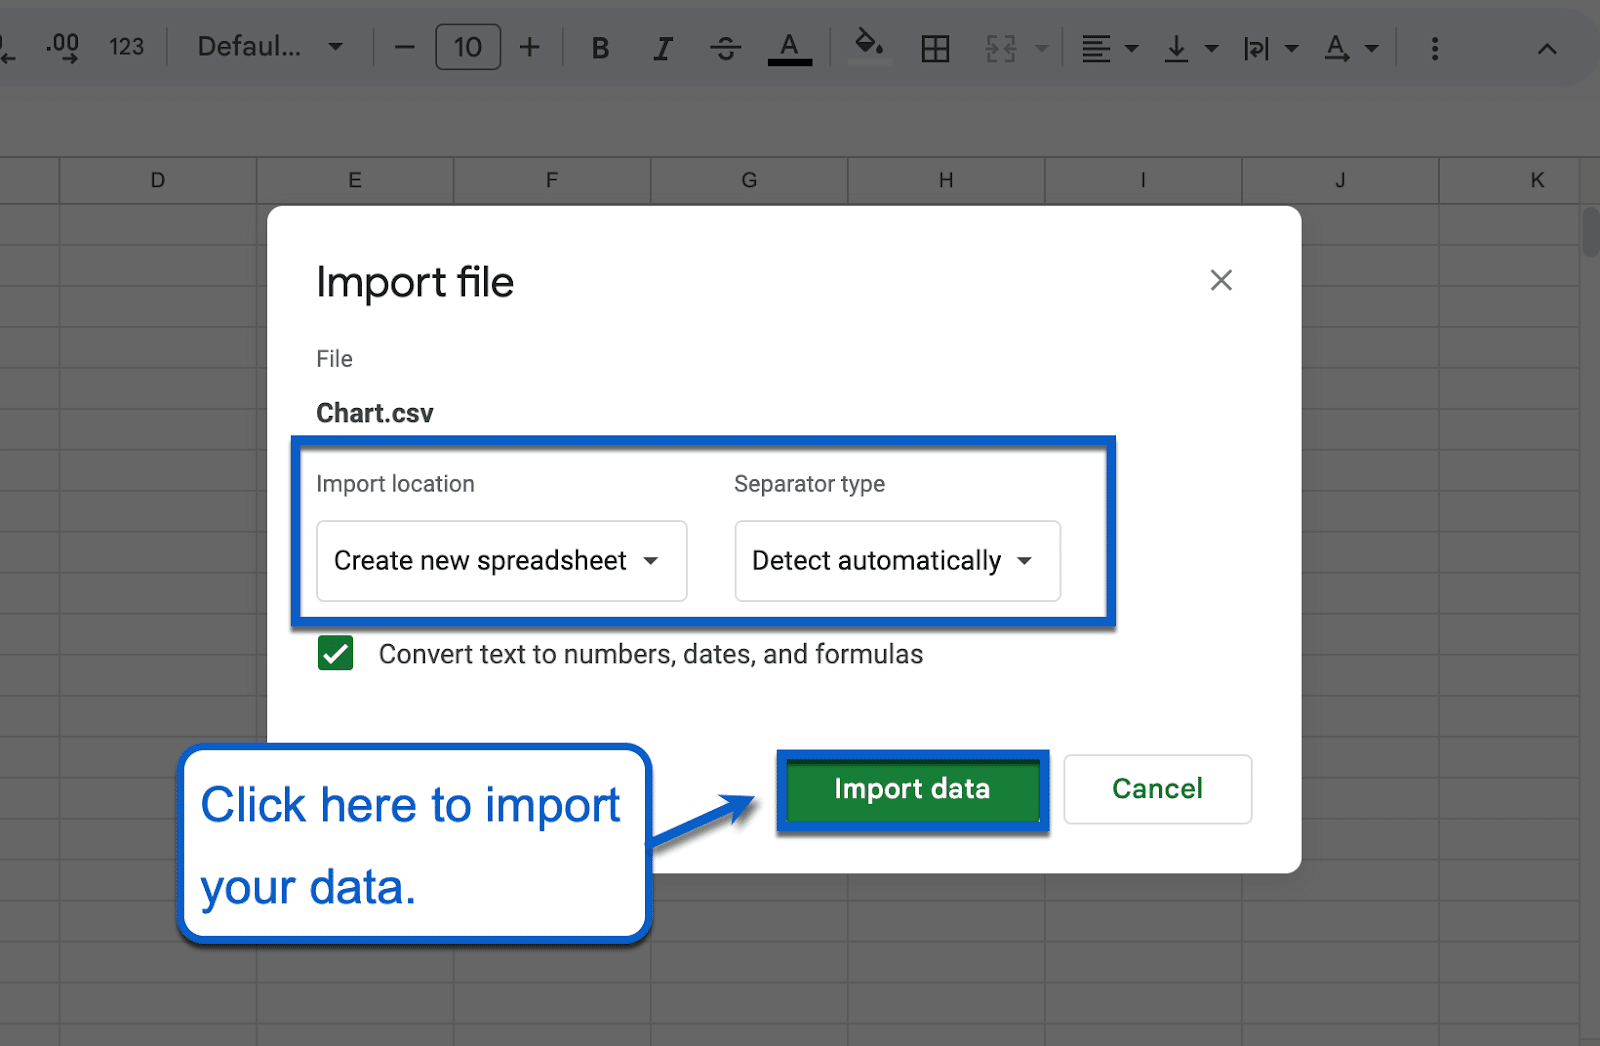 UntitledClick Import data to finalize your settings